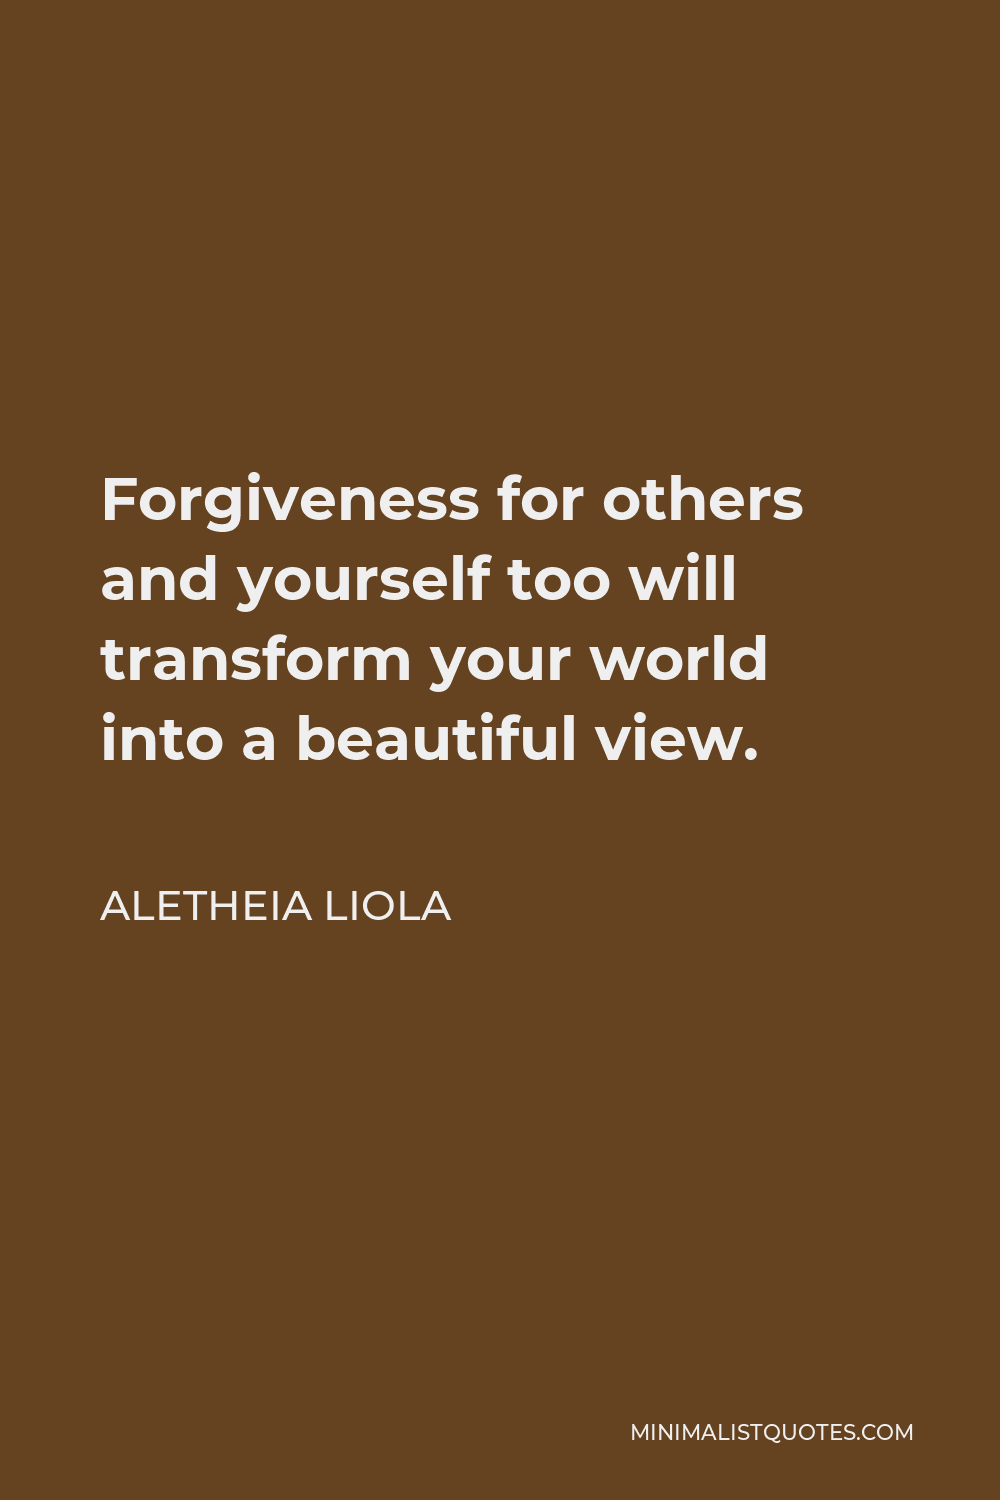 Aletheia Liola Quote - Forgiveness for others and yourself too will transform your world into a beautiful view.